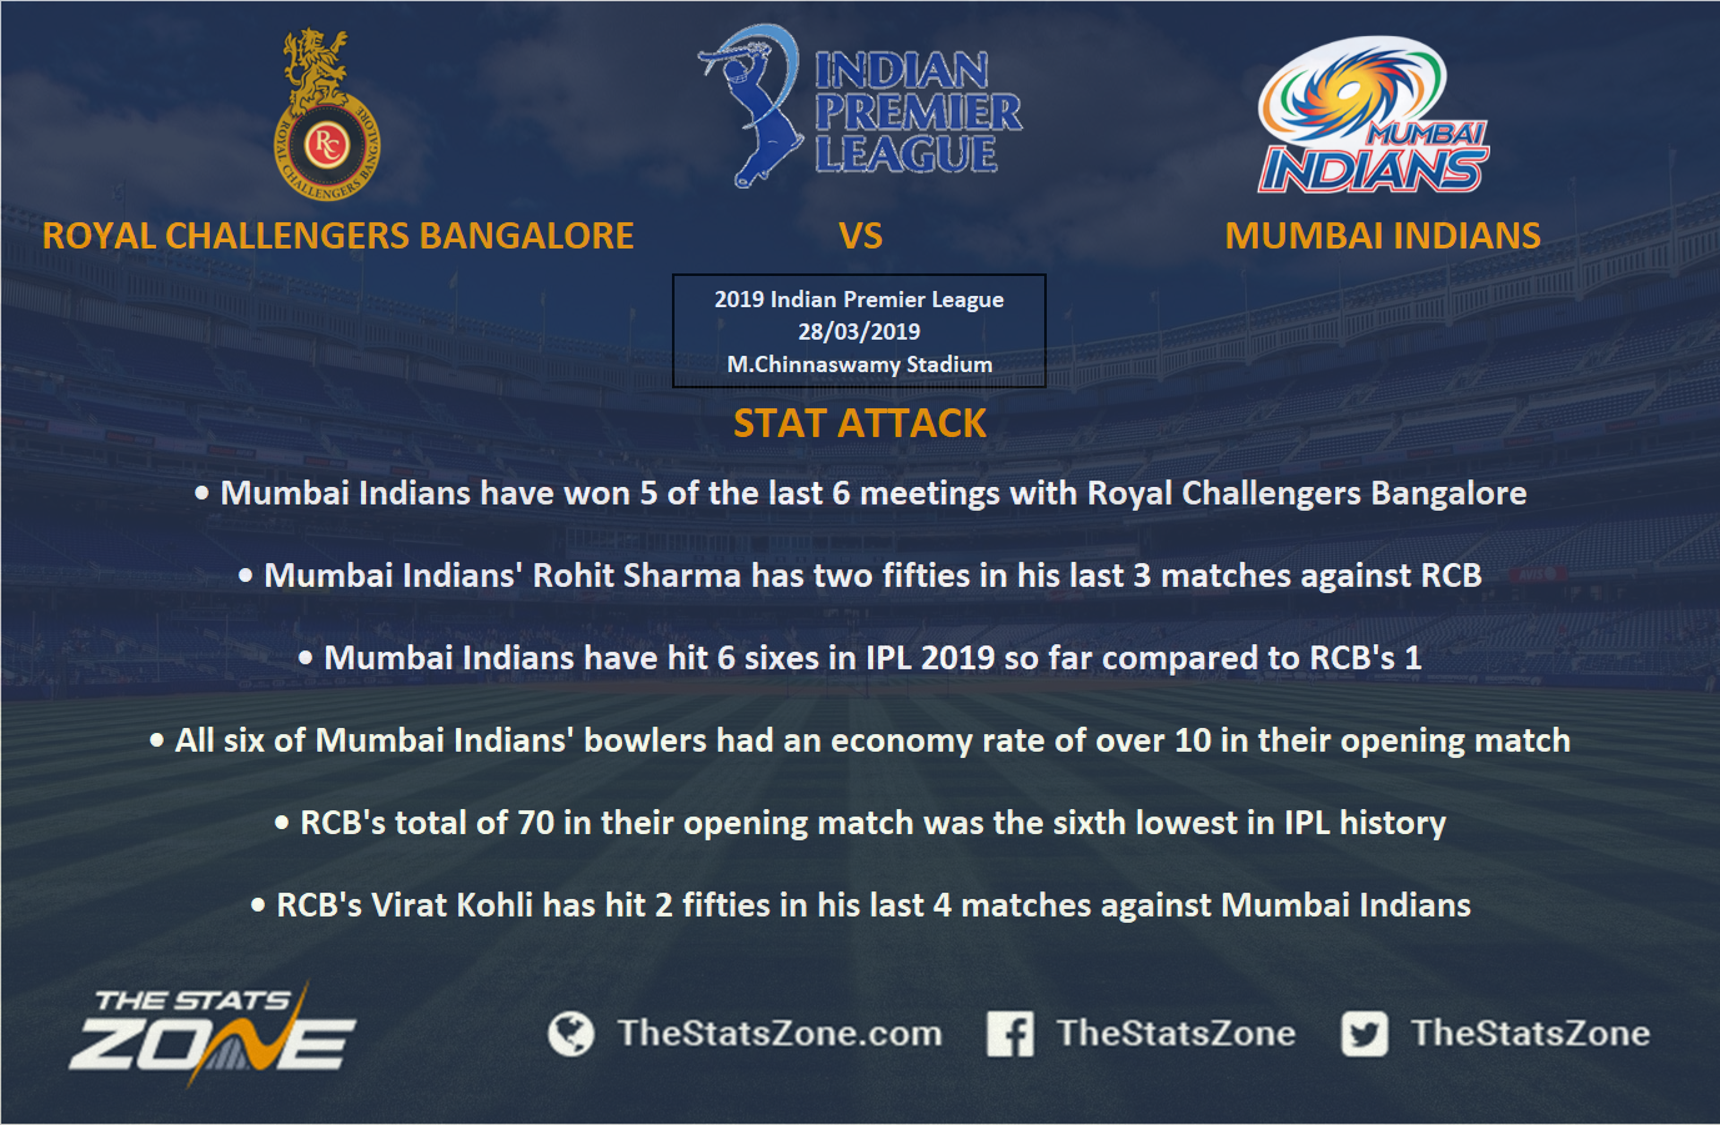 Ipl 2019 Royal Challengers Bangalore Vs Mumbai Indians Preview And Prediction The Stats Zone 